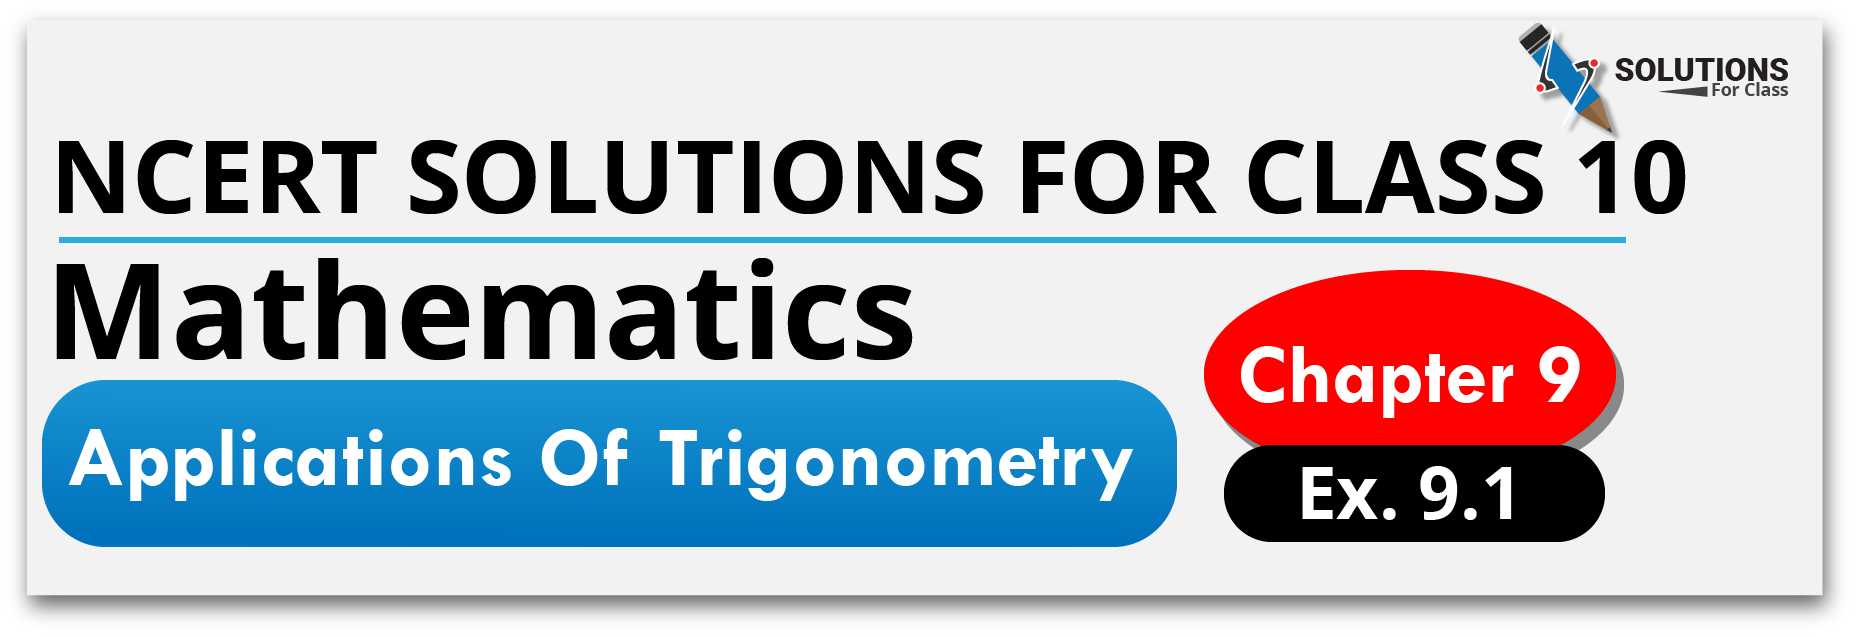 NCERT Solutions For Class 10, Maths, Chapter 9, Applications Of Trigonometry, Exercise 9.1